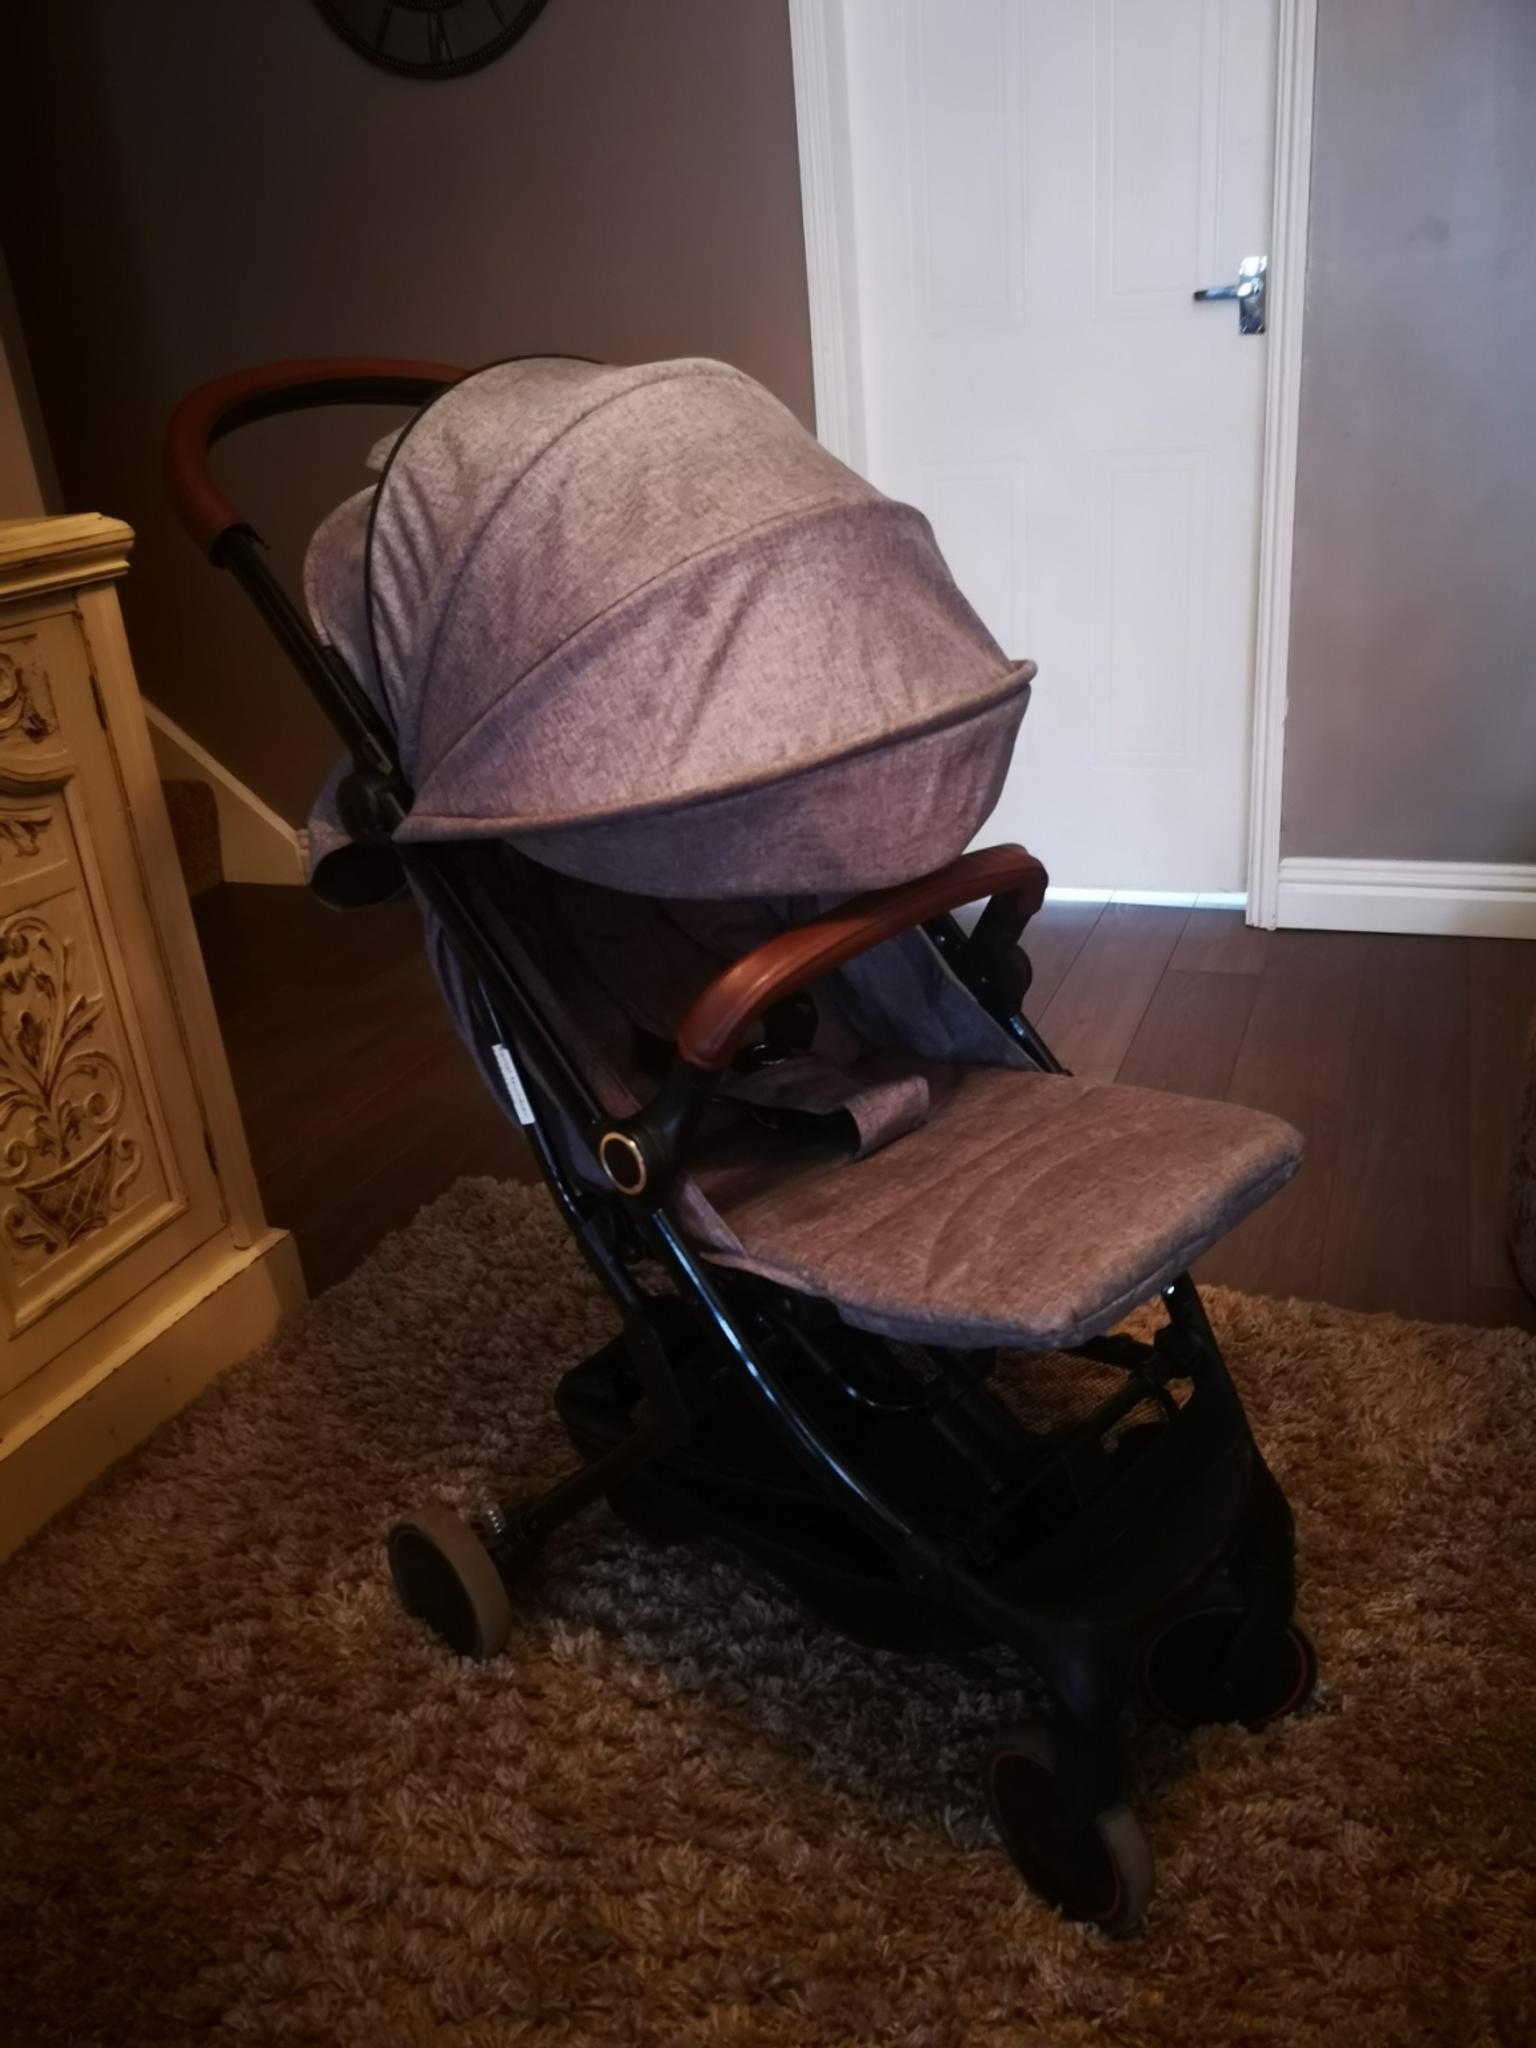 the best car seat and stroller